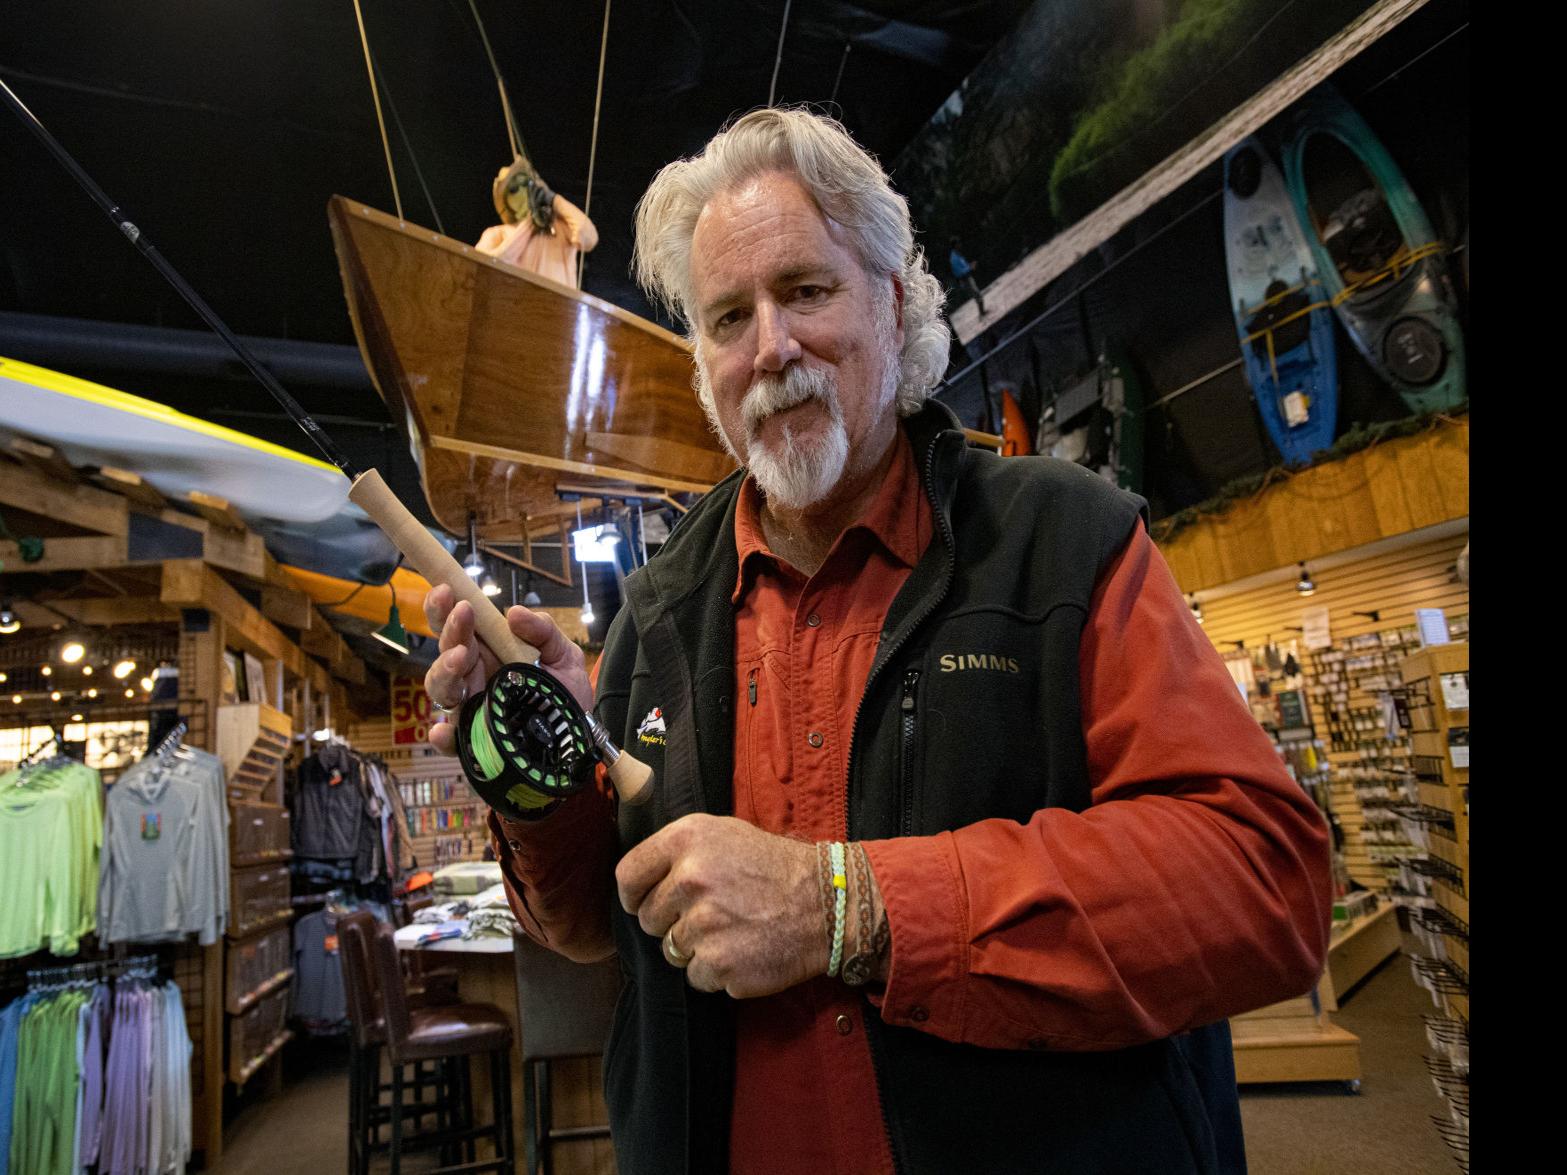 Owner of Angler's Covey sees big opportunity for outdoor businesses in  Colorado Springs, Business